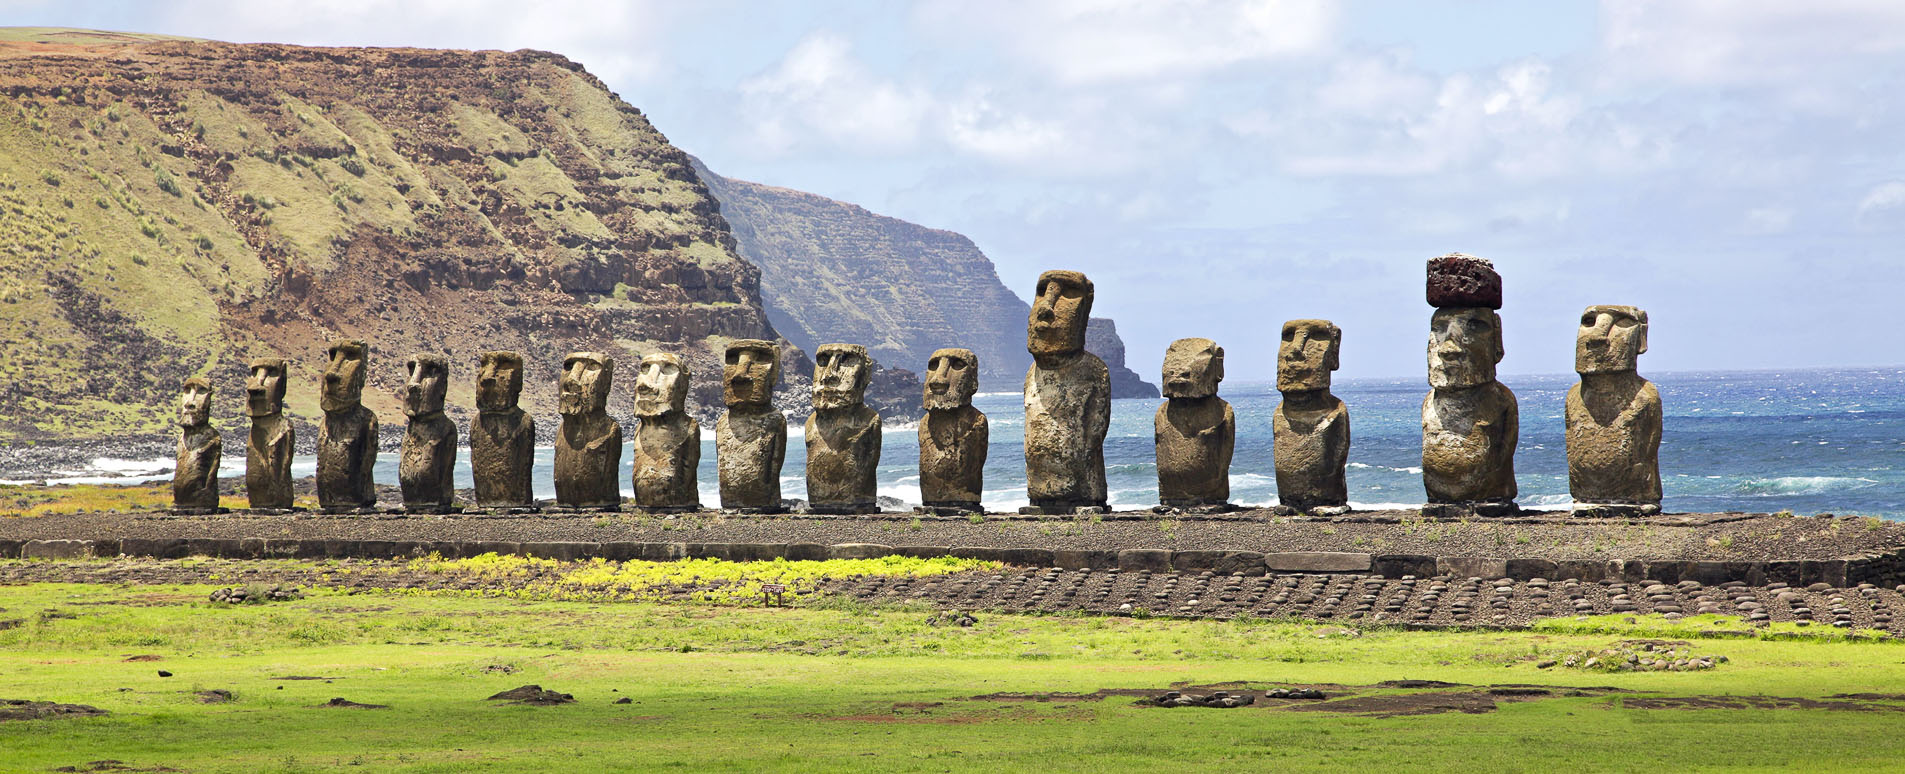 chile easter island